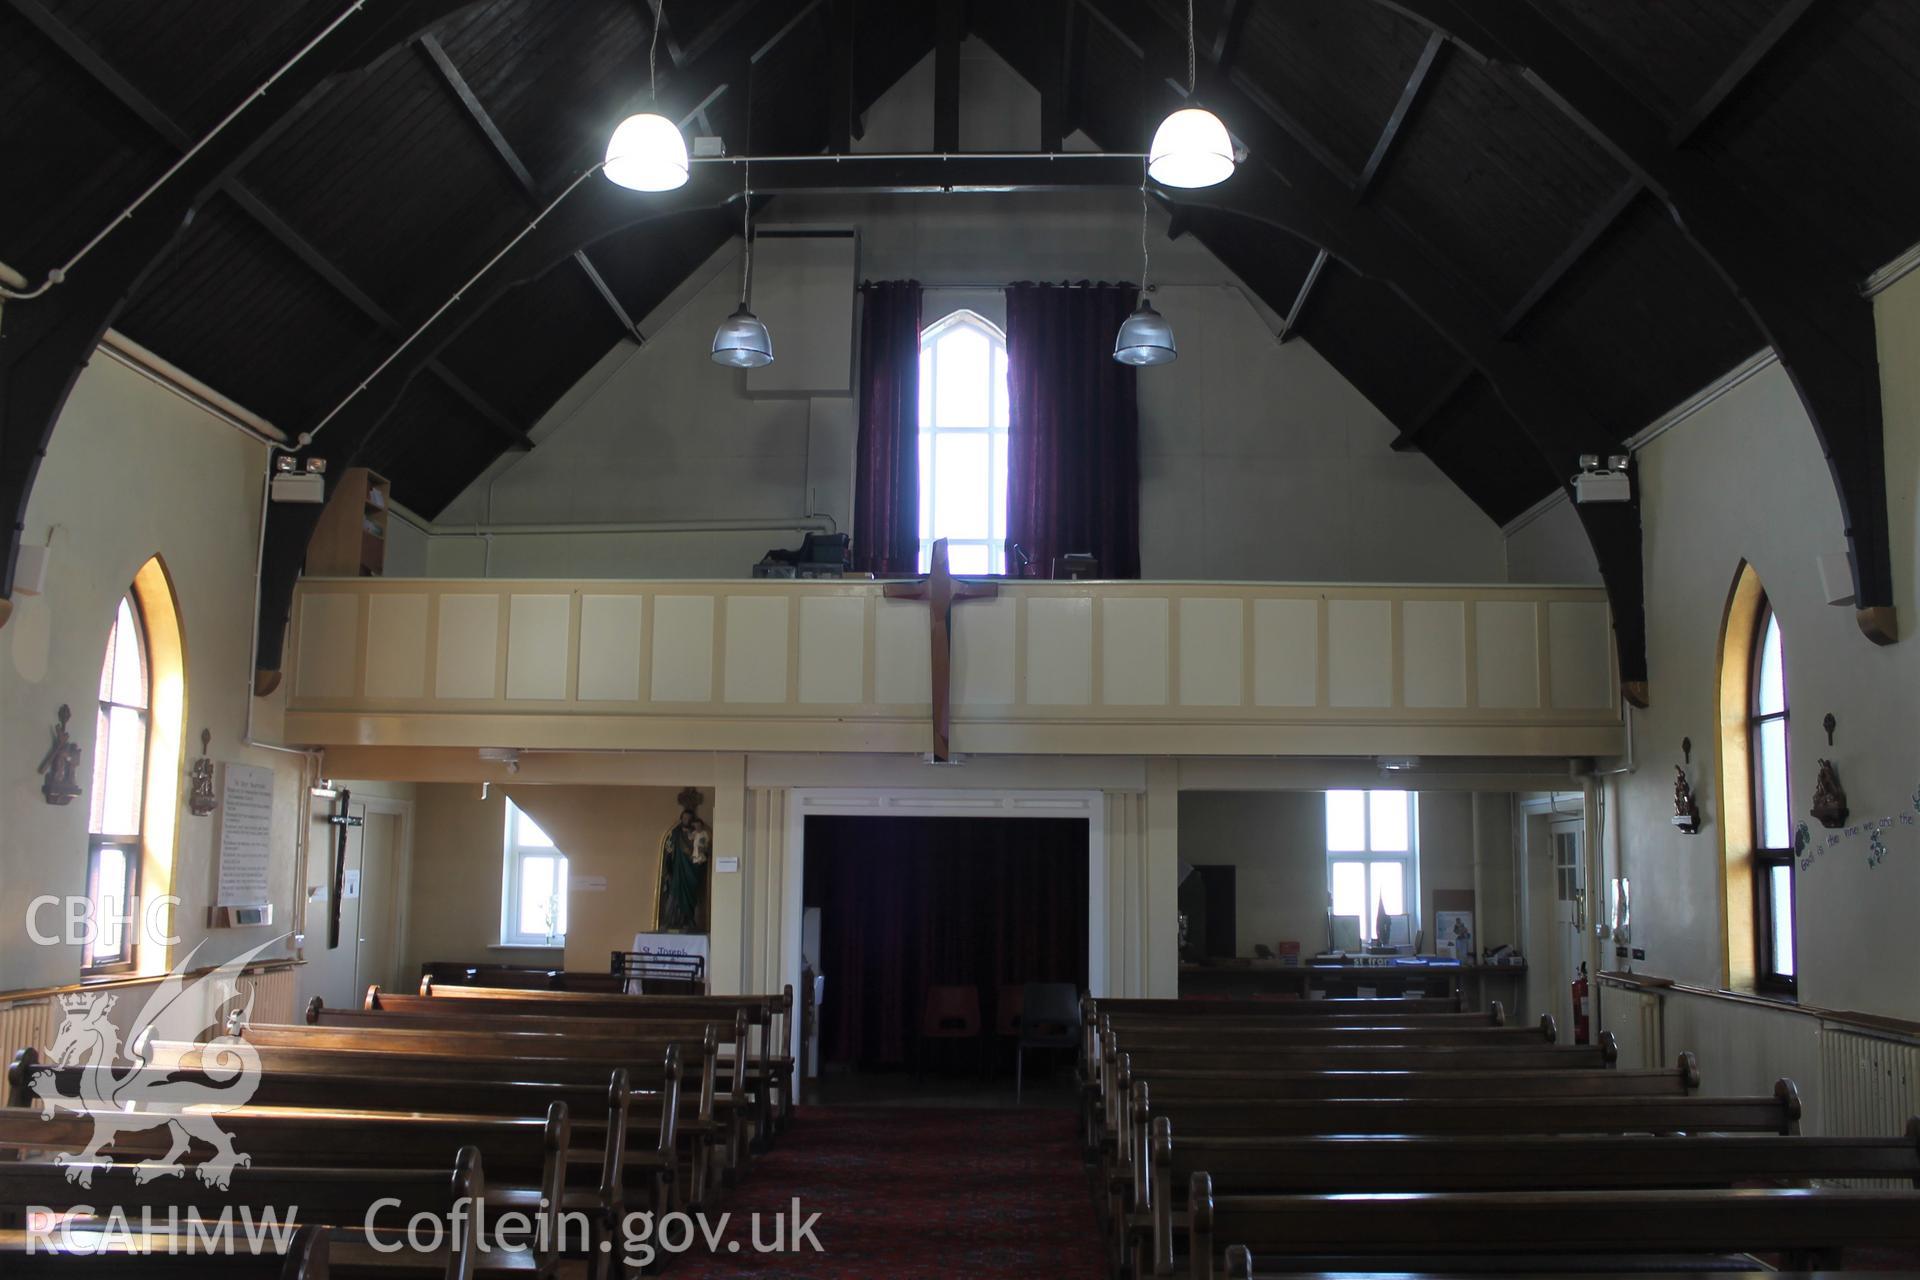 Digital colour photograph showing interior of St Francis's Catholic church, Milford Haven.